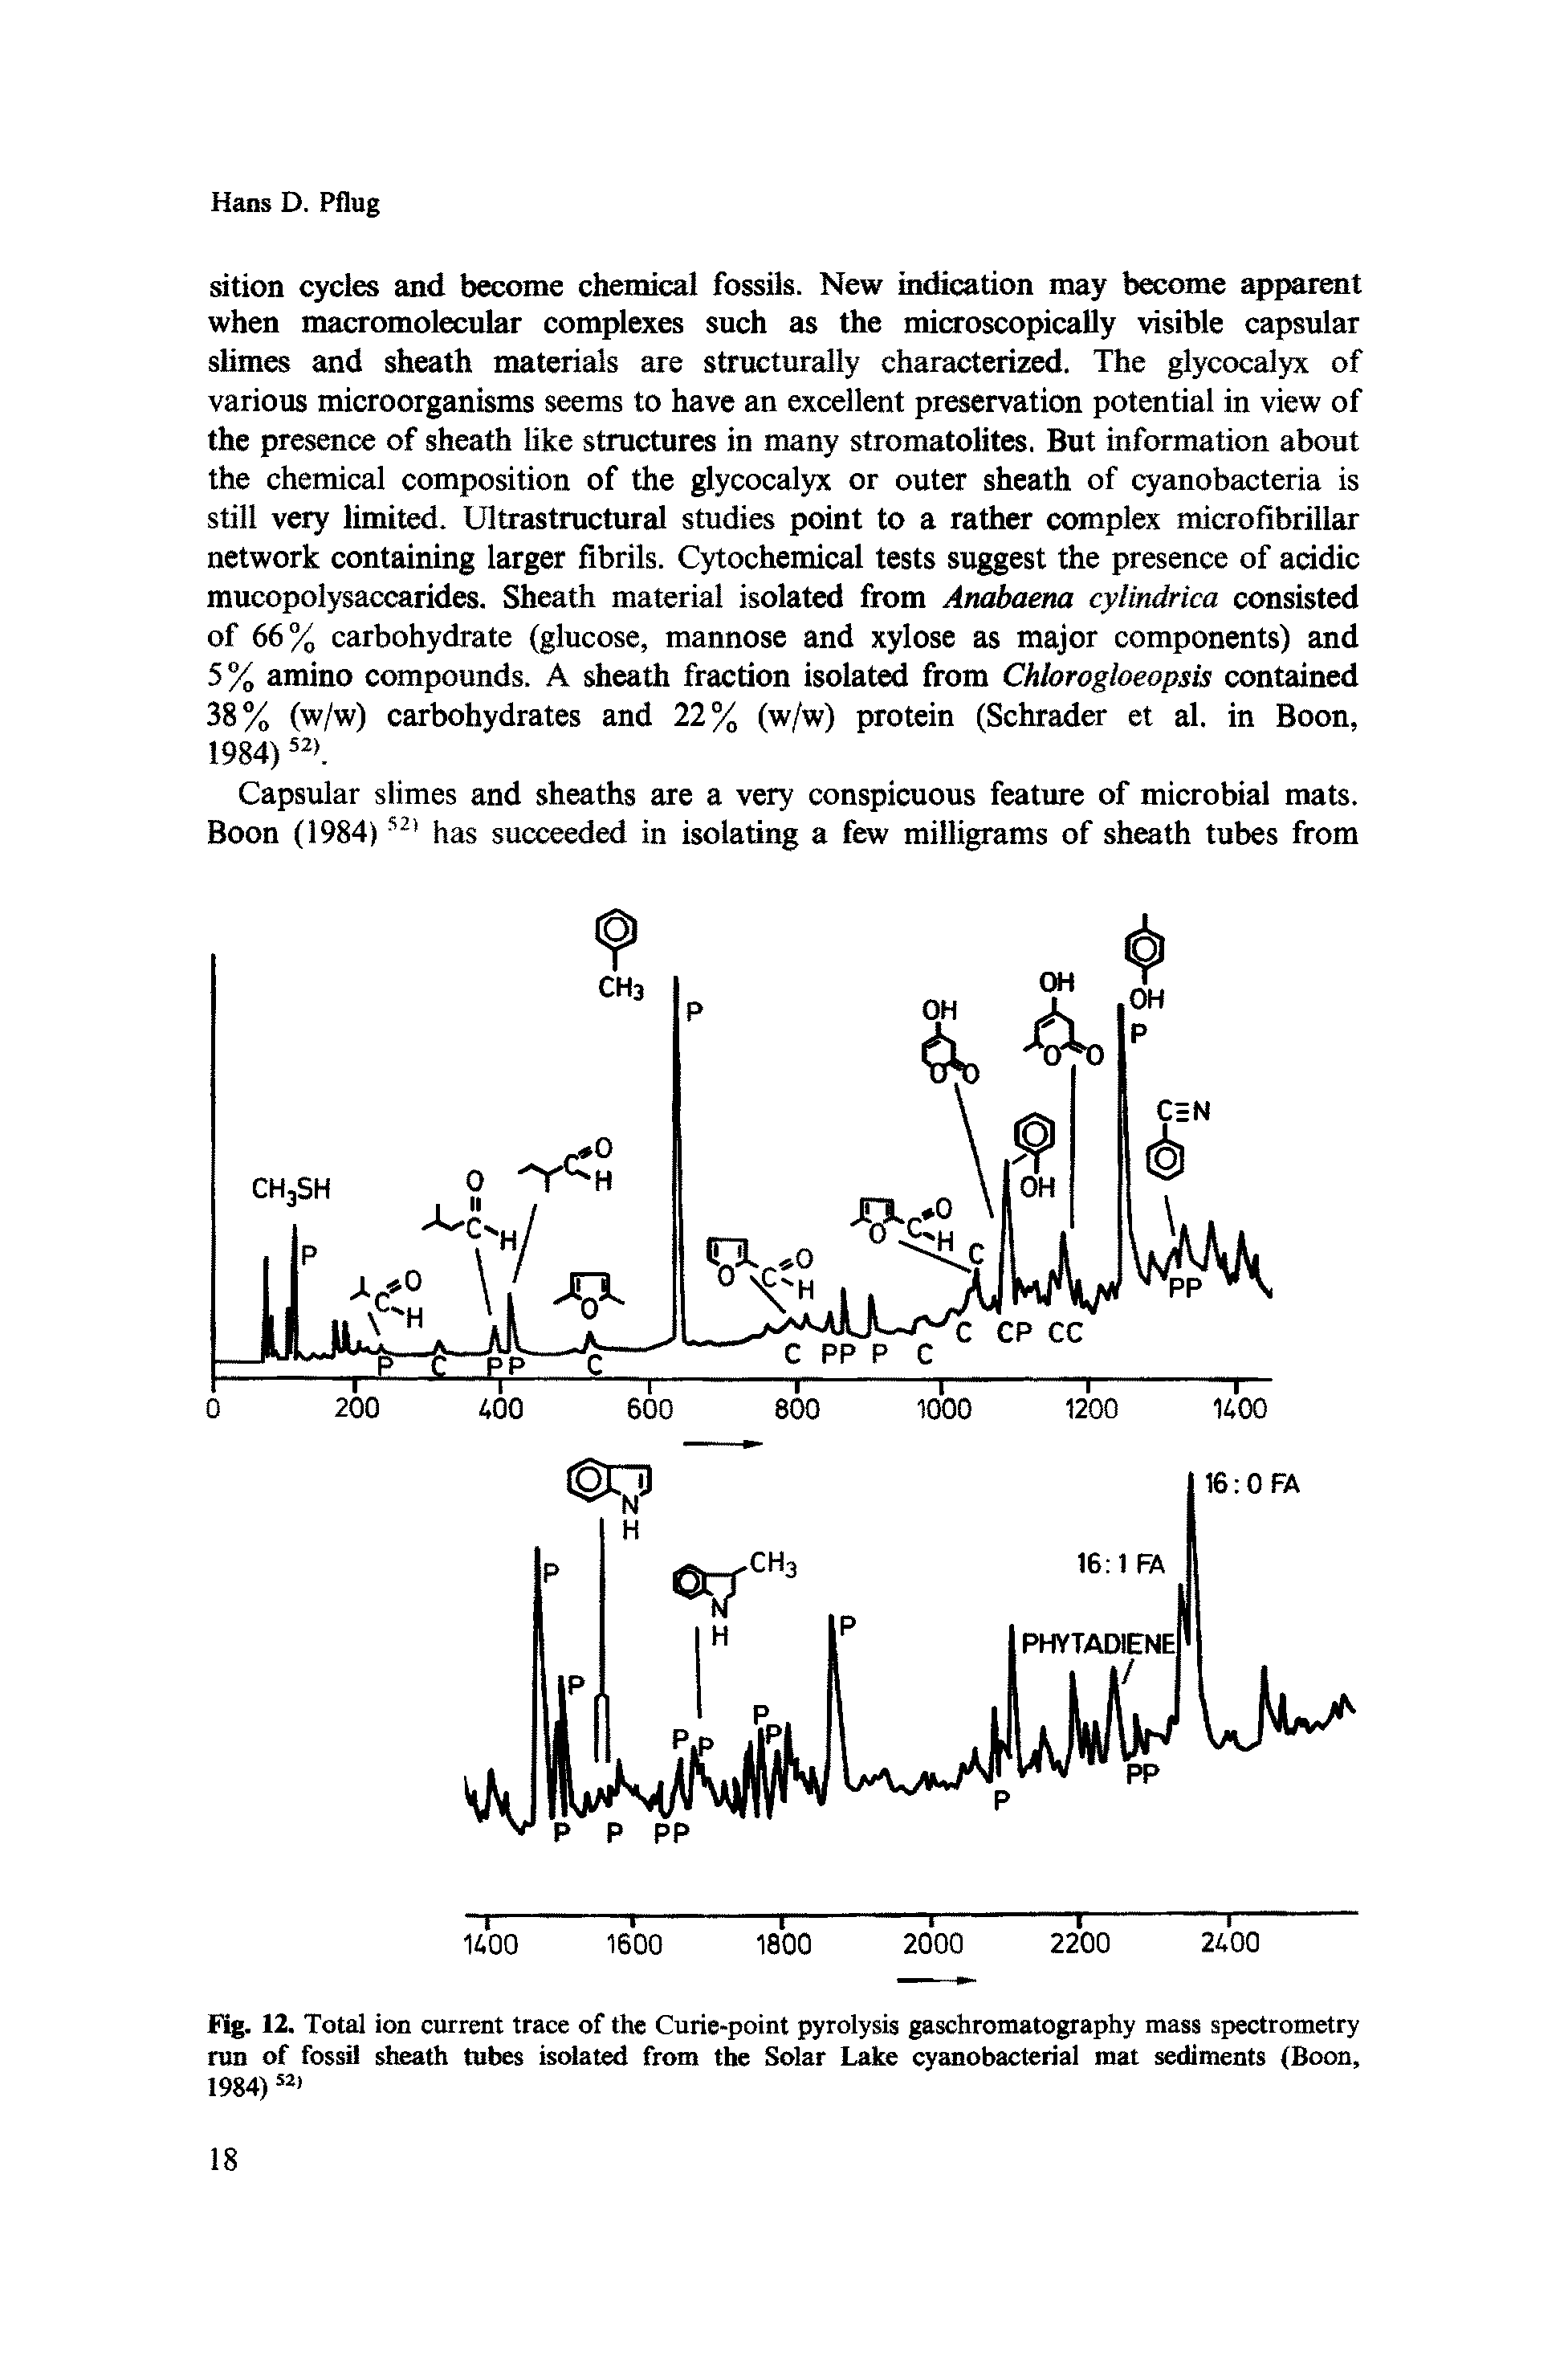 Fig. 12. Total ion current trace of the Curie-point pyrolysis gaschromatography mass spectrometry run of fossil sheath tubes isolated from the Solar Lake cyanobacterial mat sediments (Boon, 1984) 521...